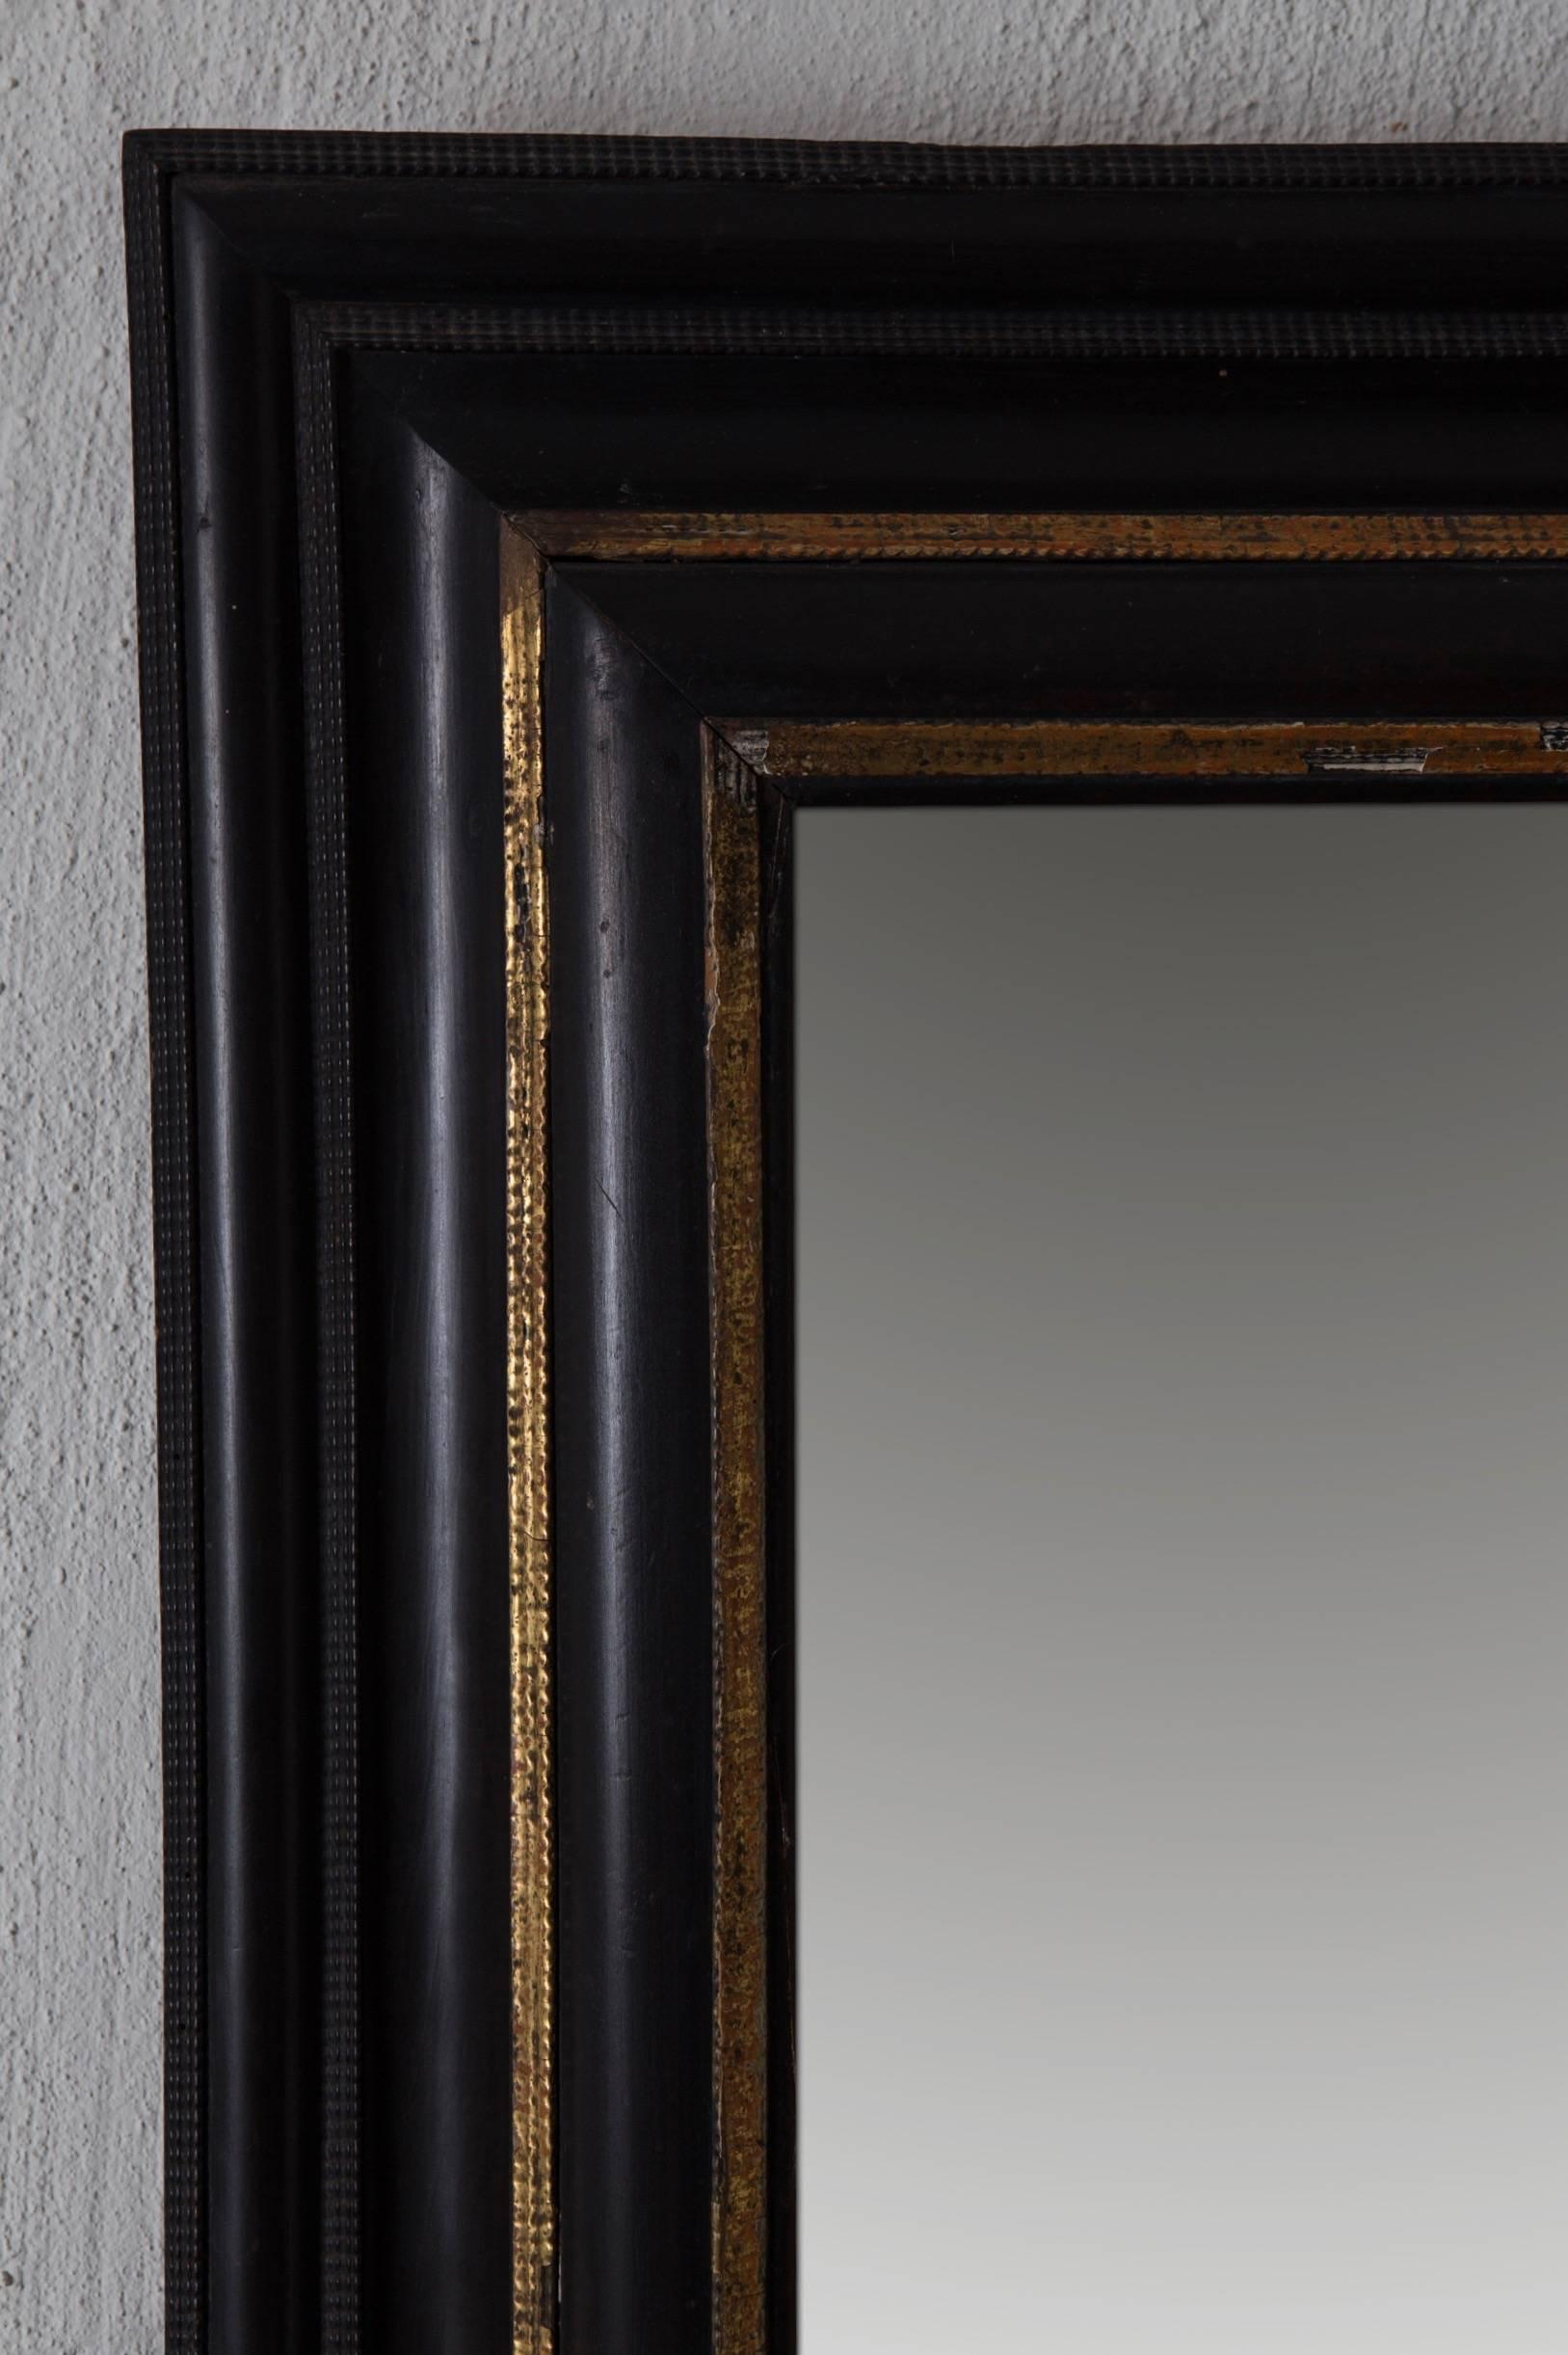 Mirror Baroque Swedish Black Ebonized Gilded Details, 18th Century, Sweden. A mirror made during the Baroque period in Northern Europe. Ebonized (black) frame decorated with gilded details. Old mirror glass. 

 